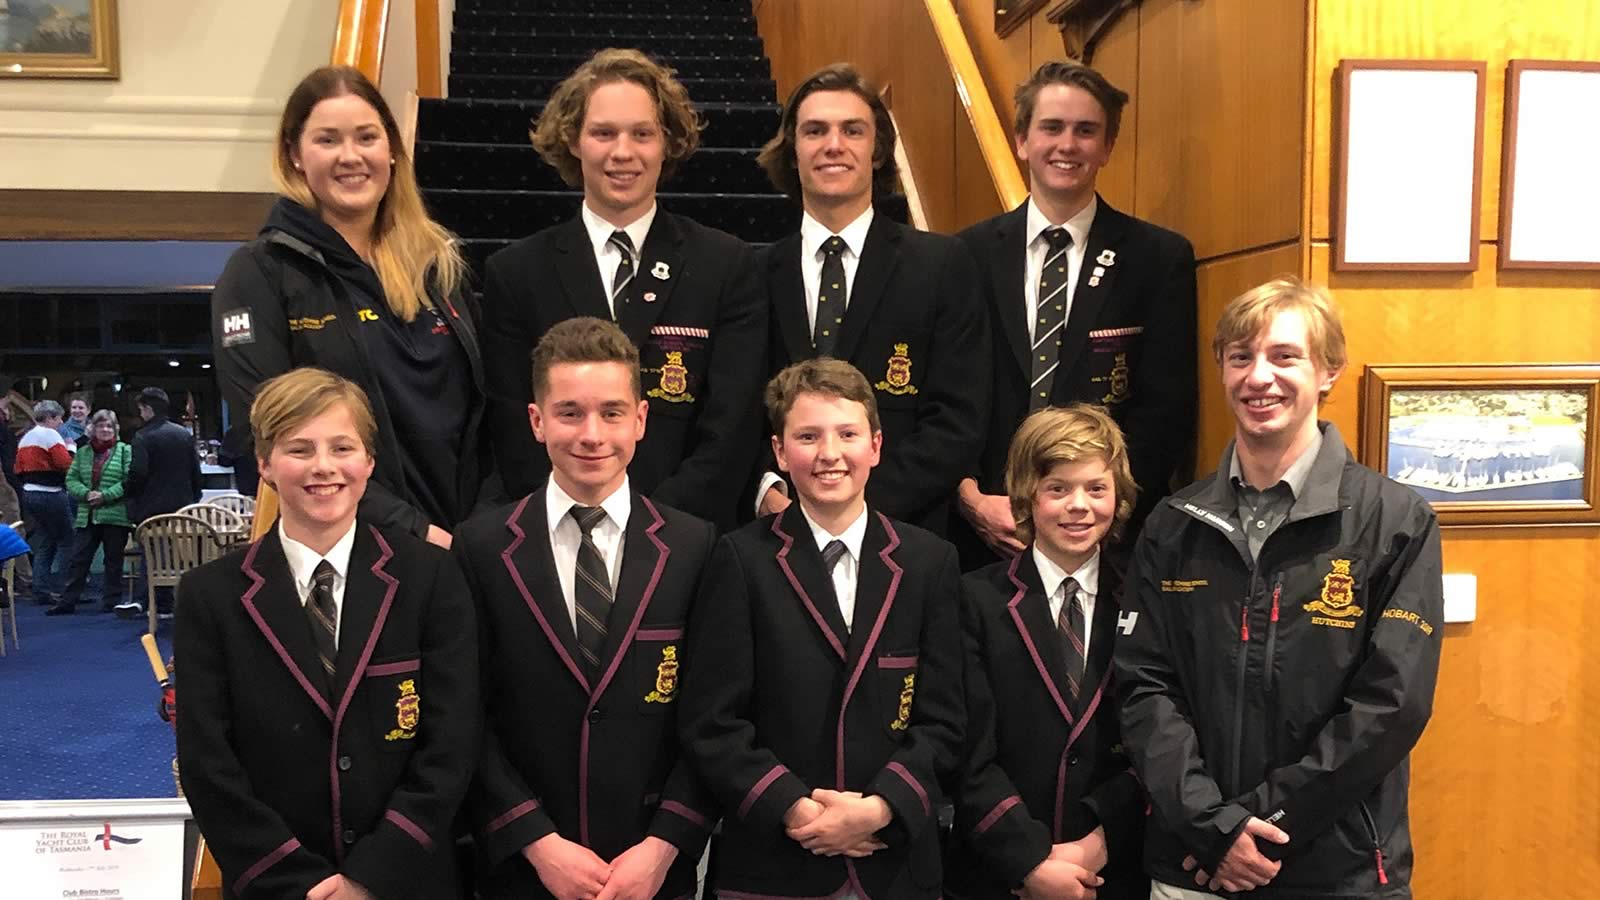 Back row – Miss Louise Watson, Will Cooper, Charles Zeeman and Nicholas Smart. Front row – Gus Wilkie, Oliver Hugo, Charles Salmon, Edward Broadby and Rohan Langford.